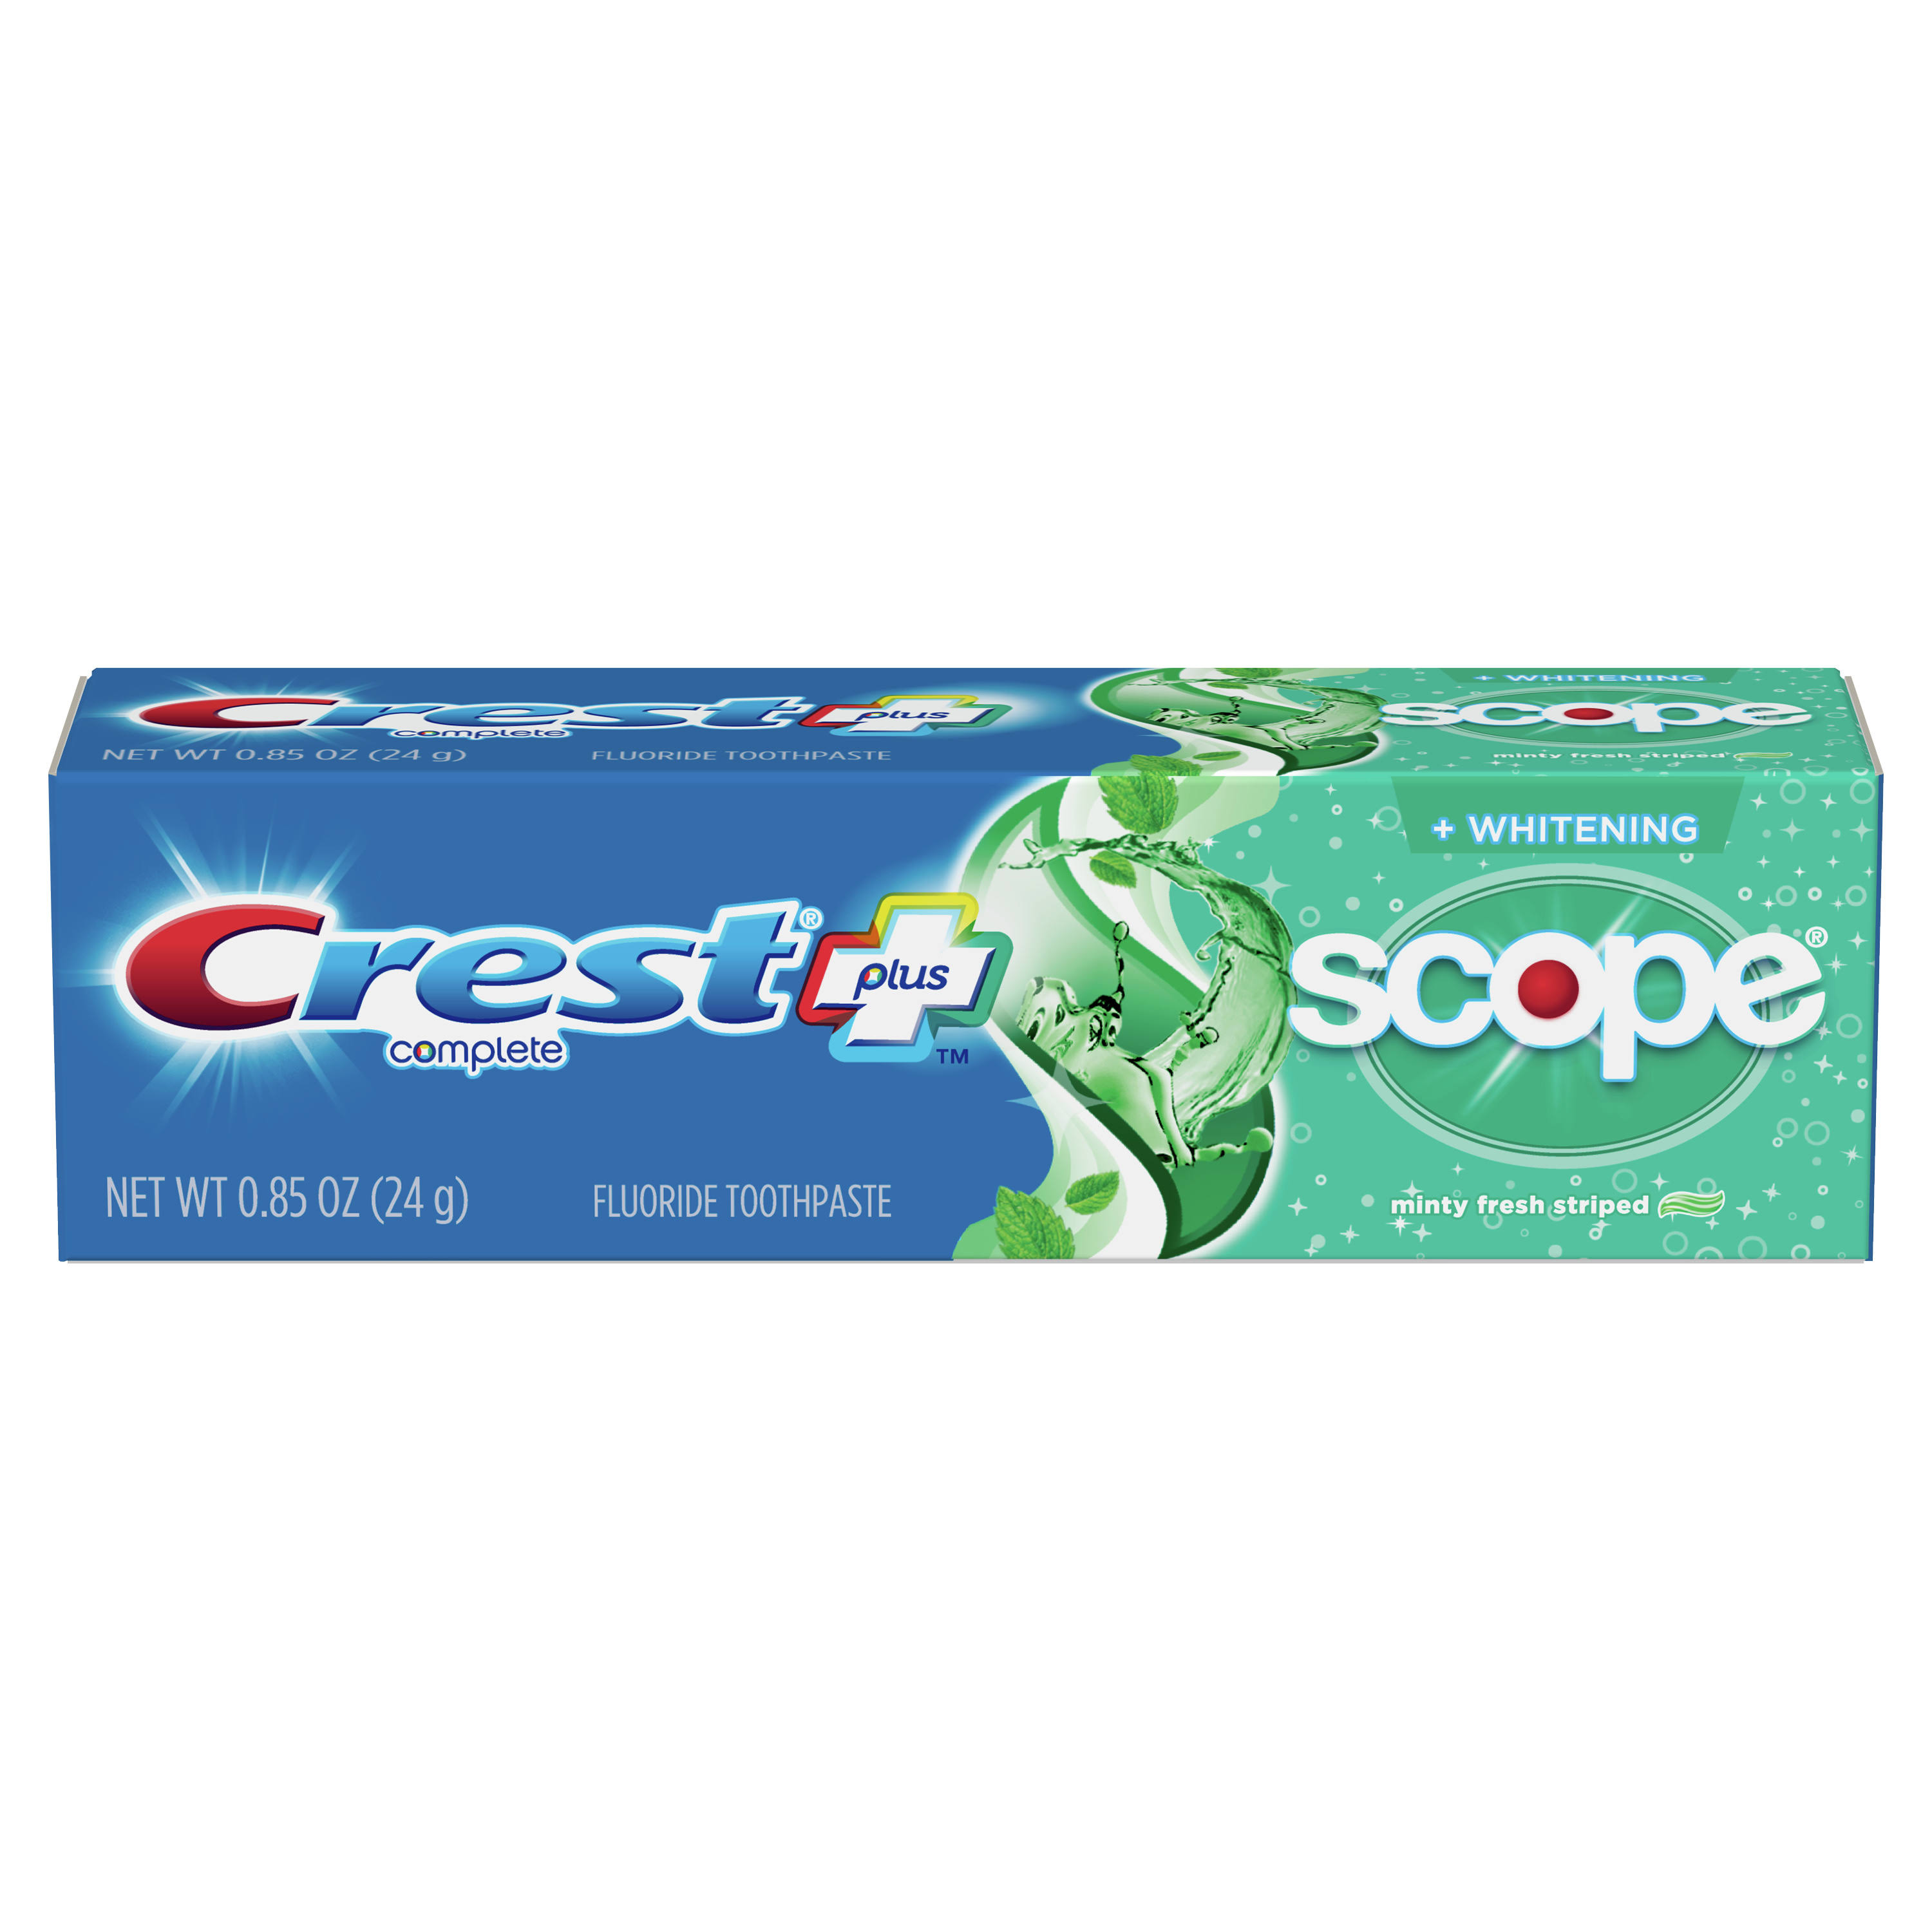 Crest Complete Multi-Benefit Striped Fluoride Toothpaste - 0.85oz, Minty Fresh